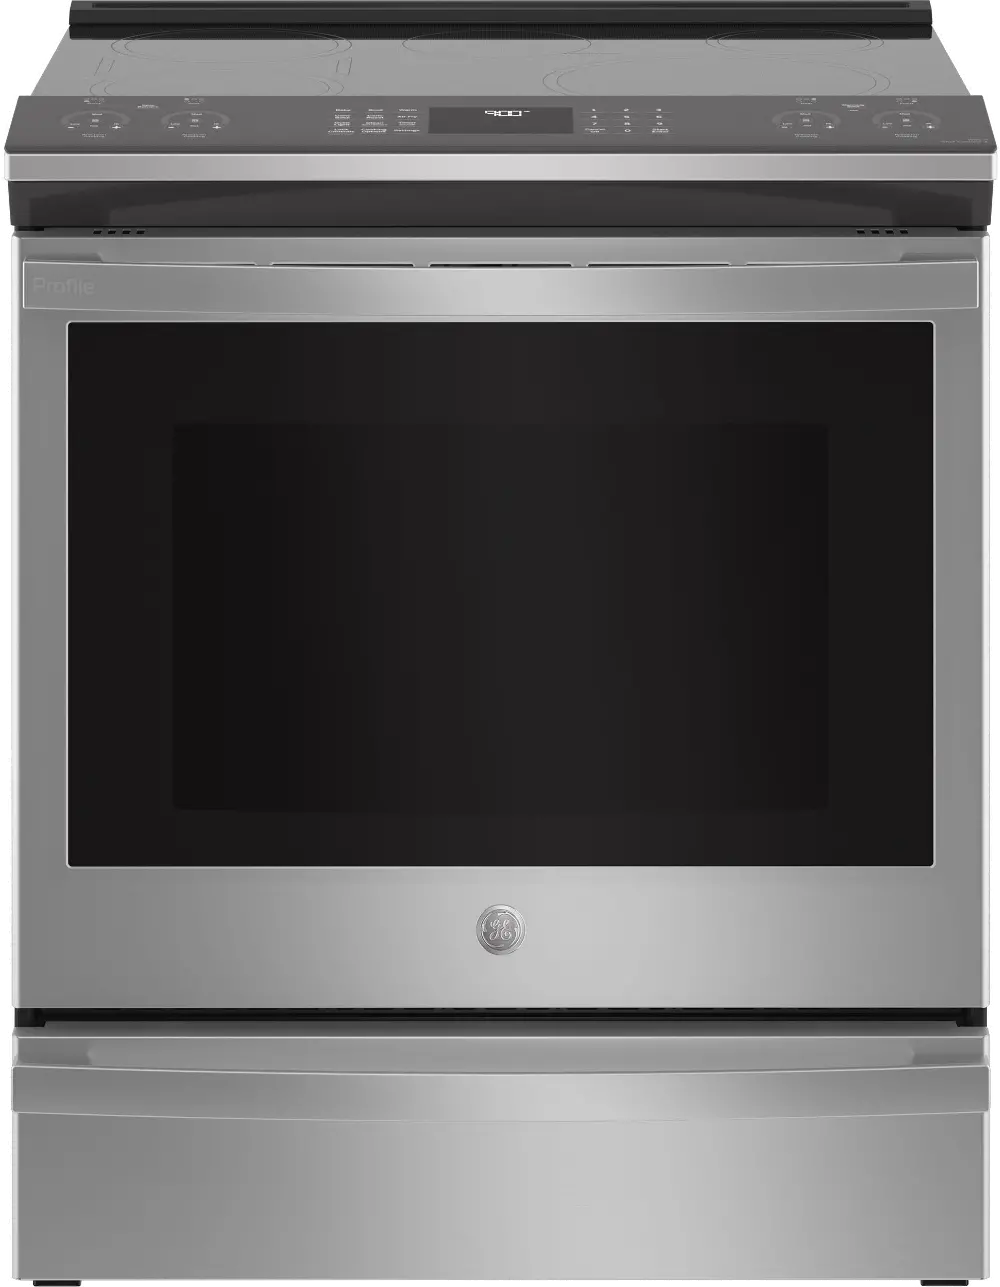 PHS930YPFS GE Profile 5.3 cu ft Electric Induction Range - Stainless Steel-1